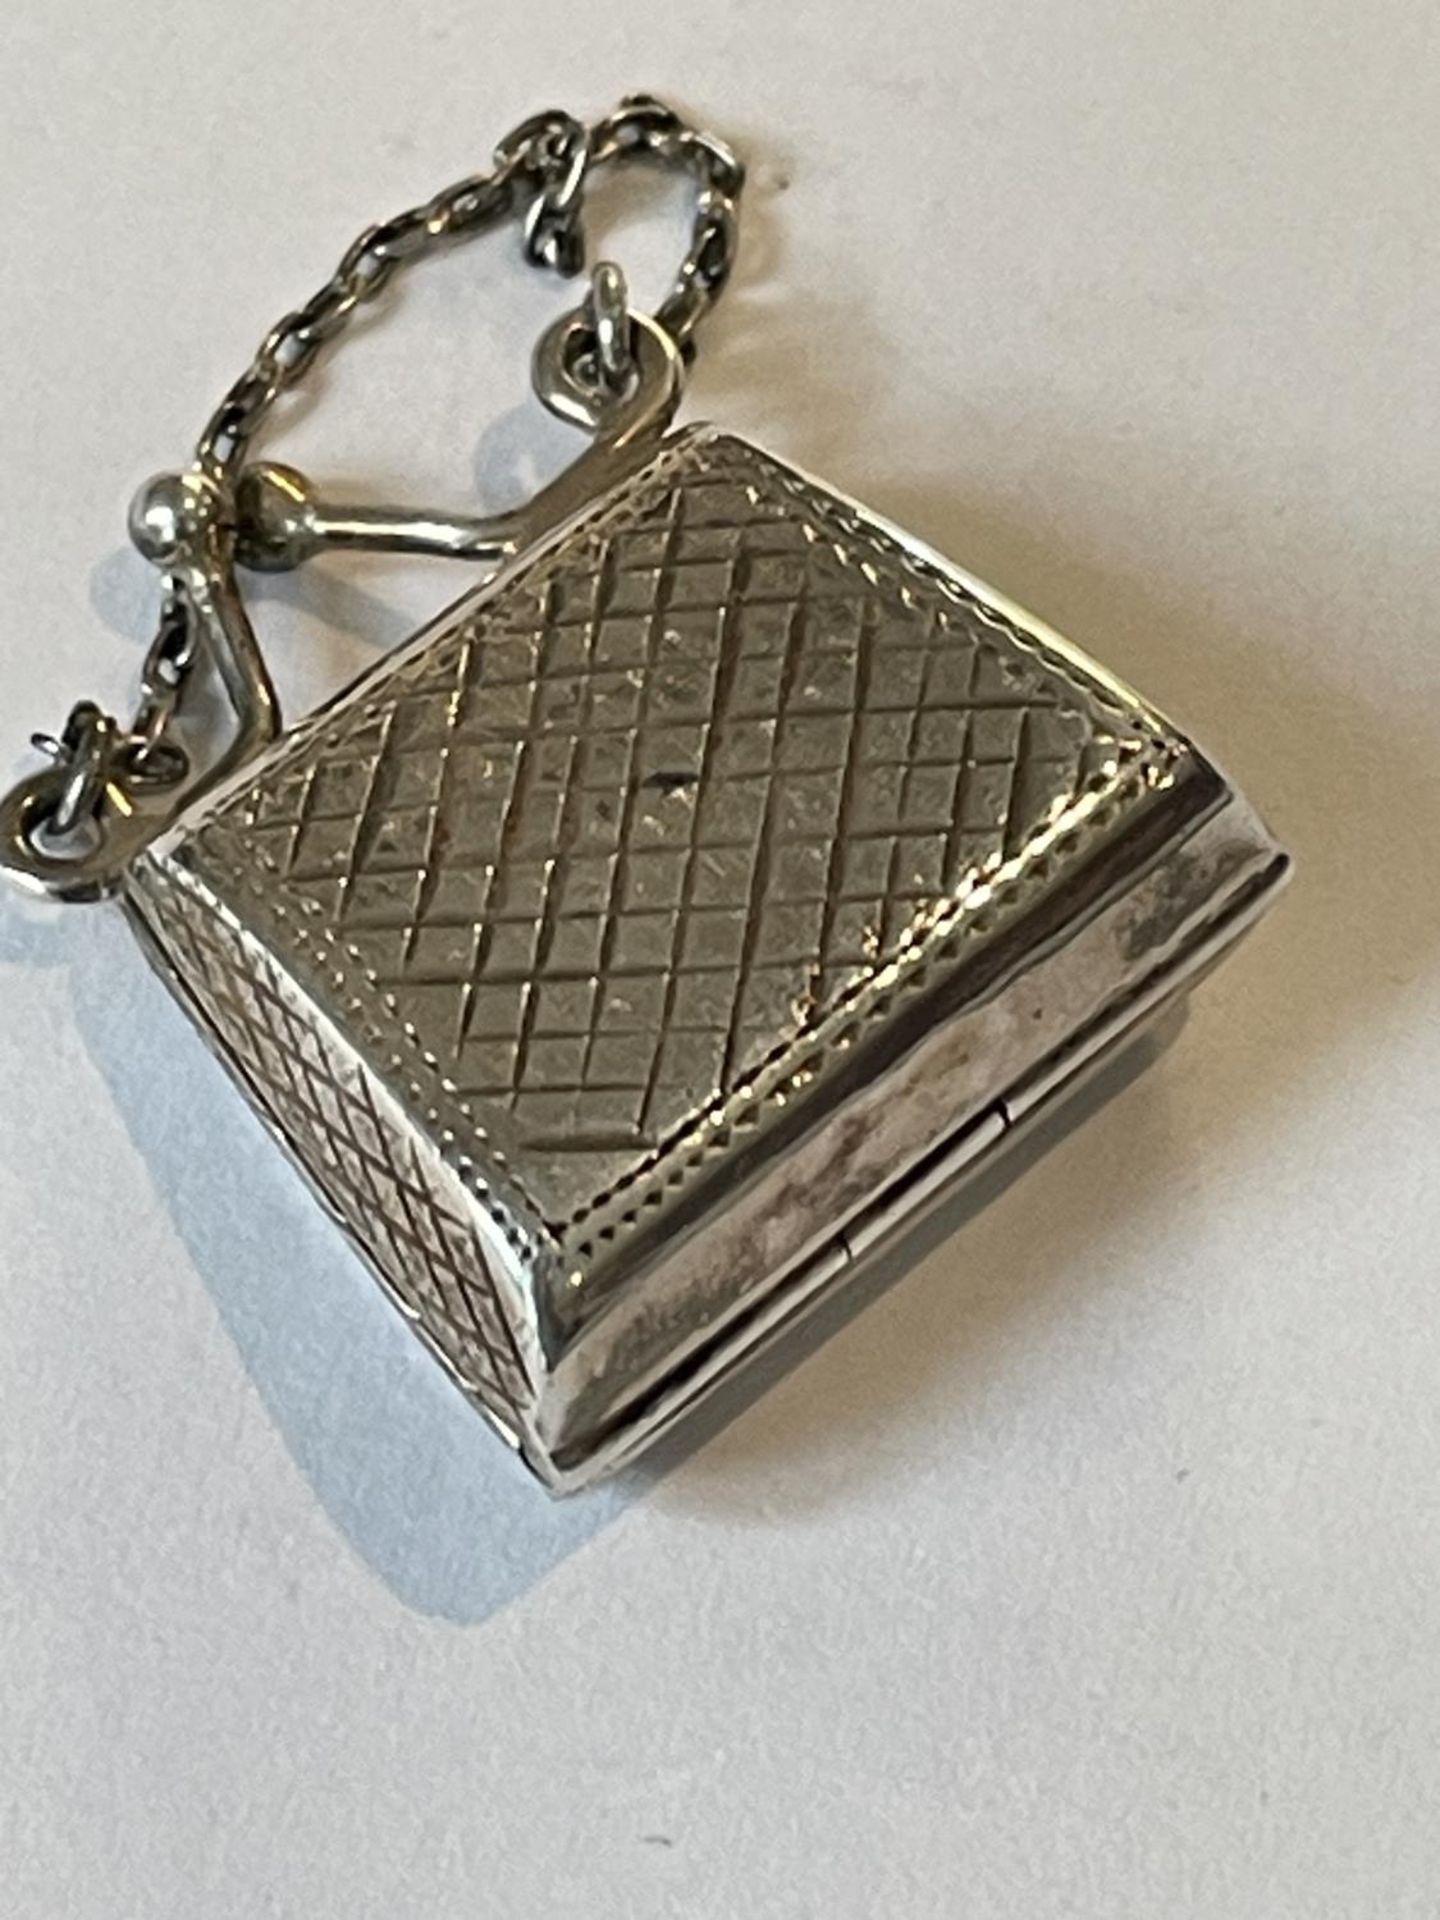 A SILVER PURSE - Image 2 of 3